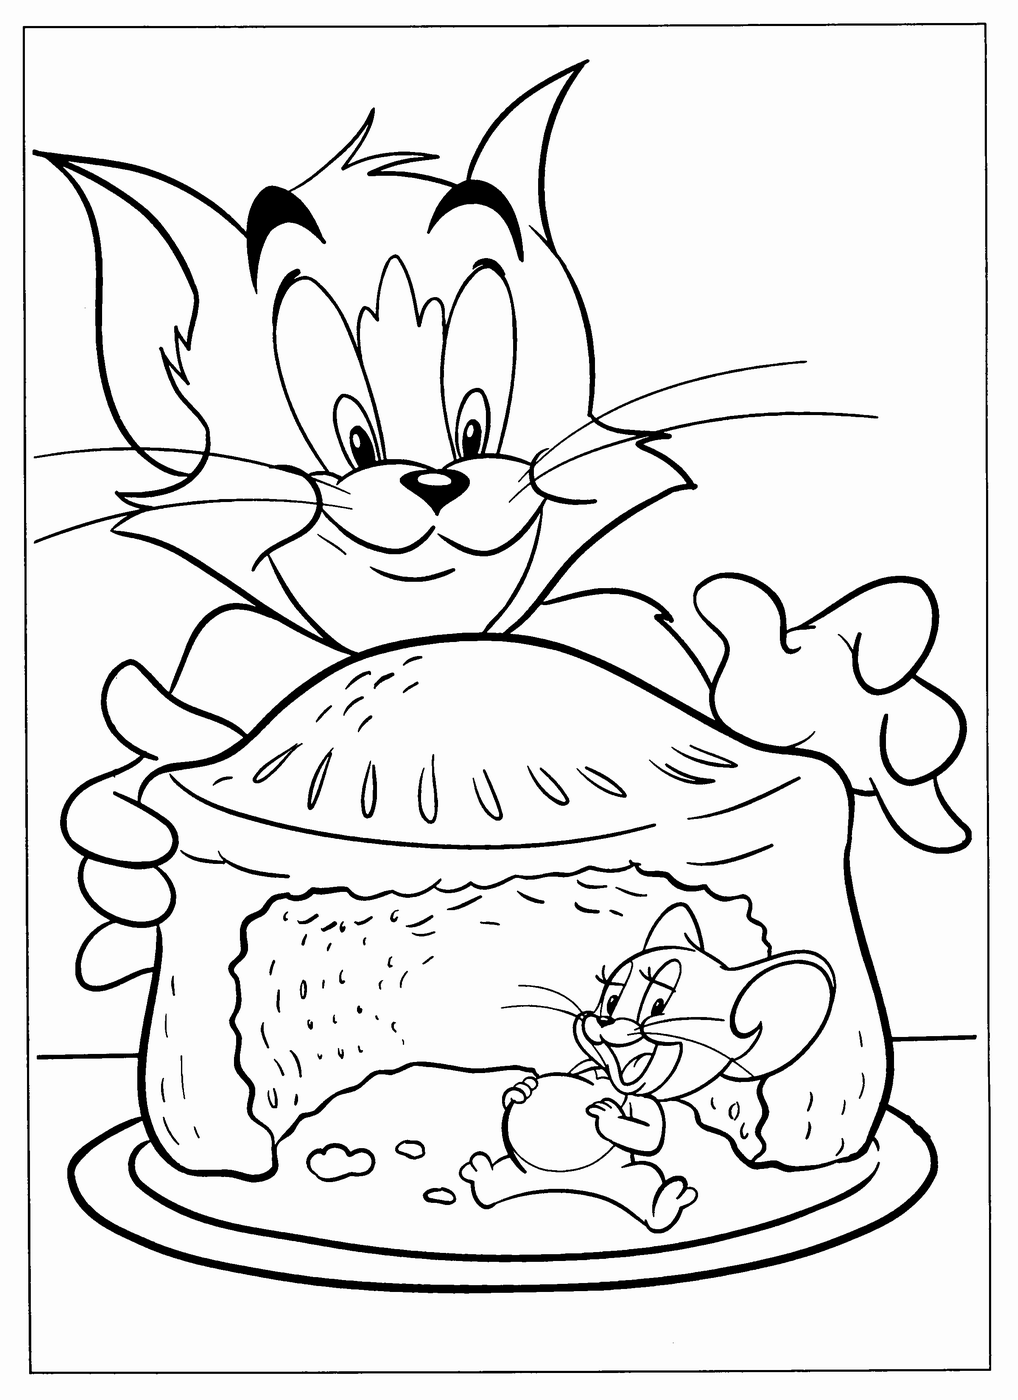 Tom and Jerry Coloring Pages TV Film tom_jerry_cl_19 Printable 2020 10149 Coloring4free